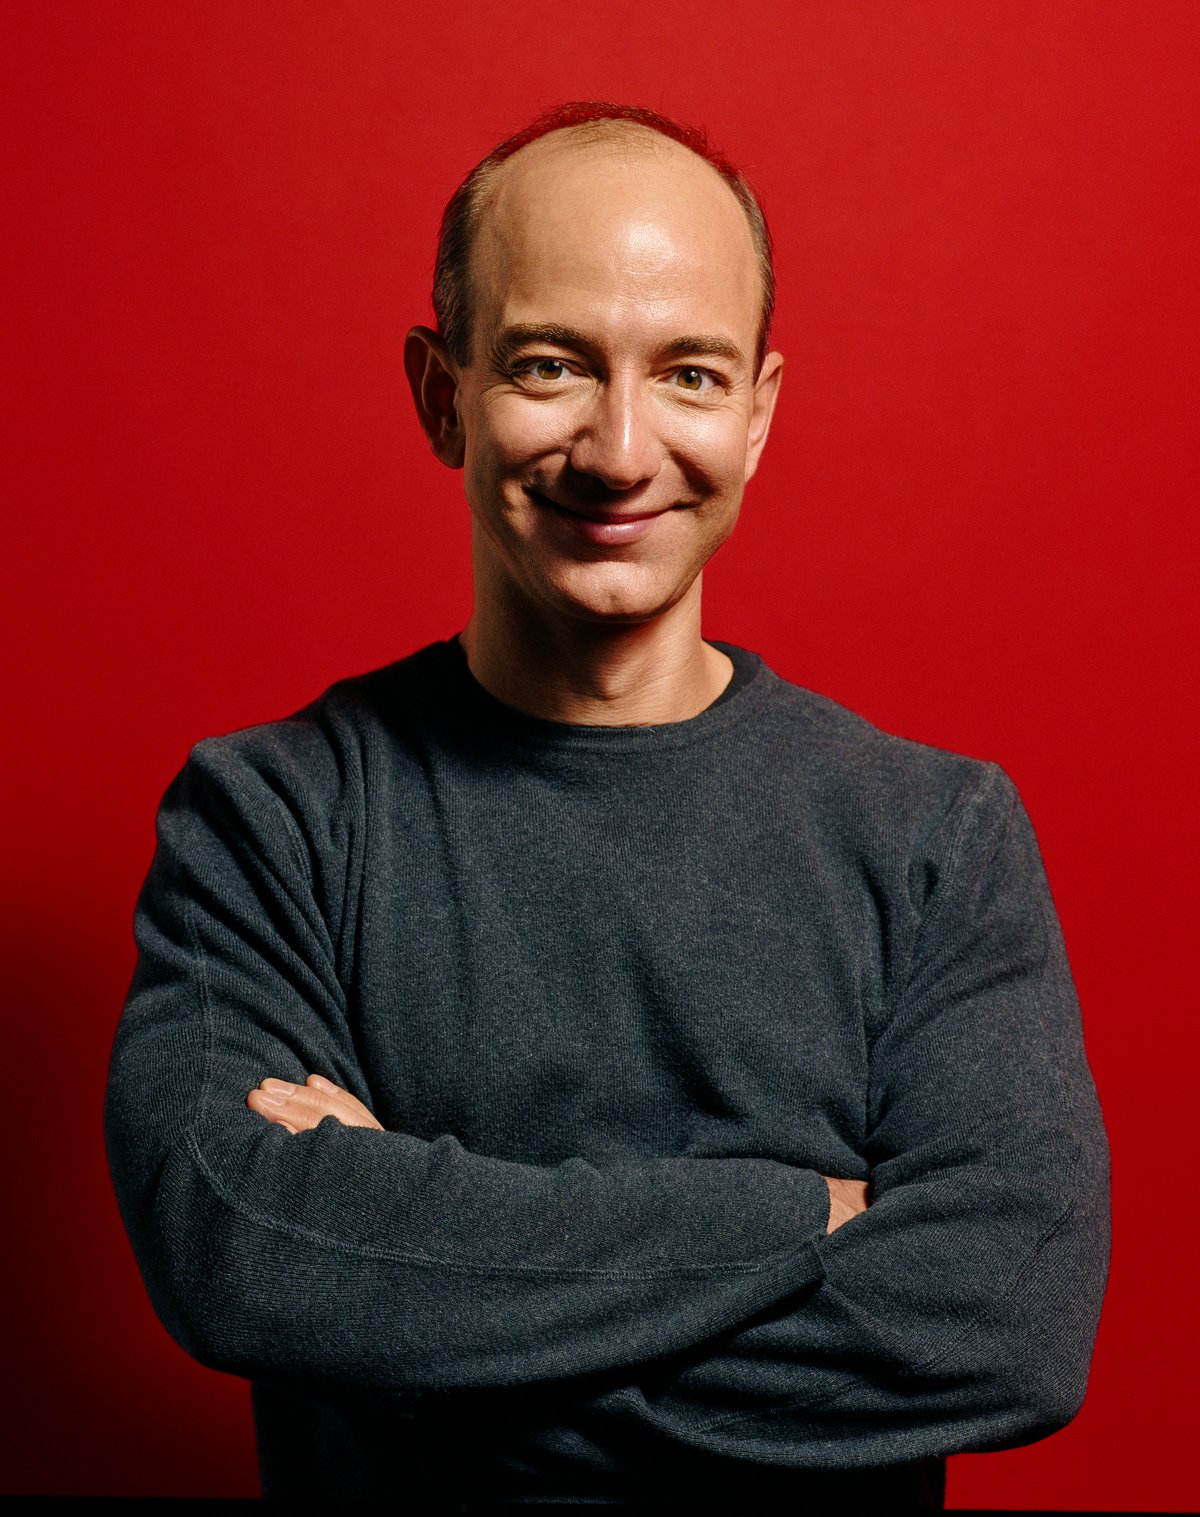 Jeff Bezos is founder and CEO of Amazon.com. He also owns The Washington Post newspaper.